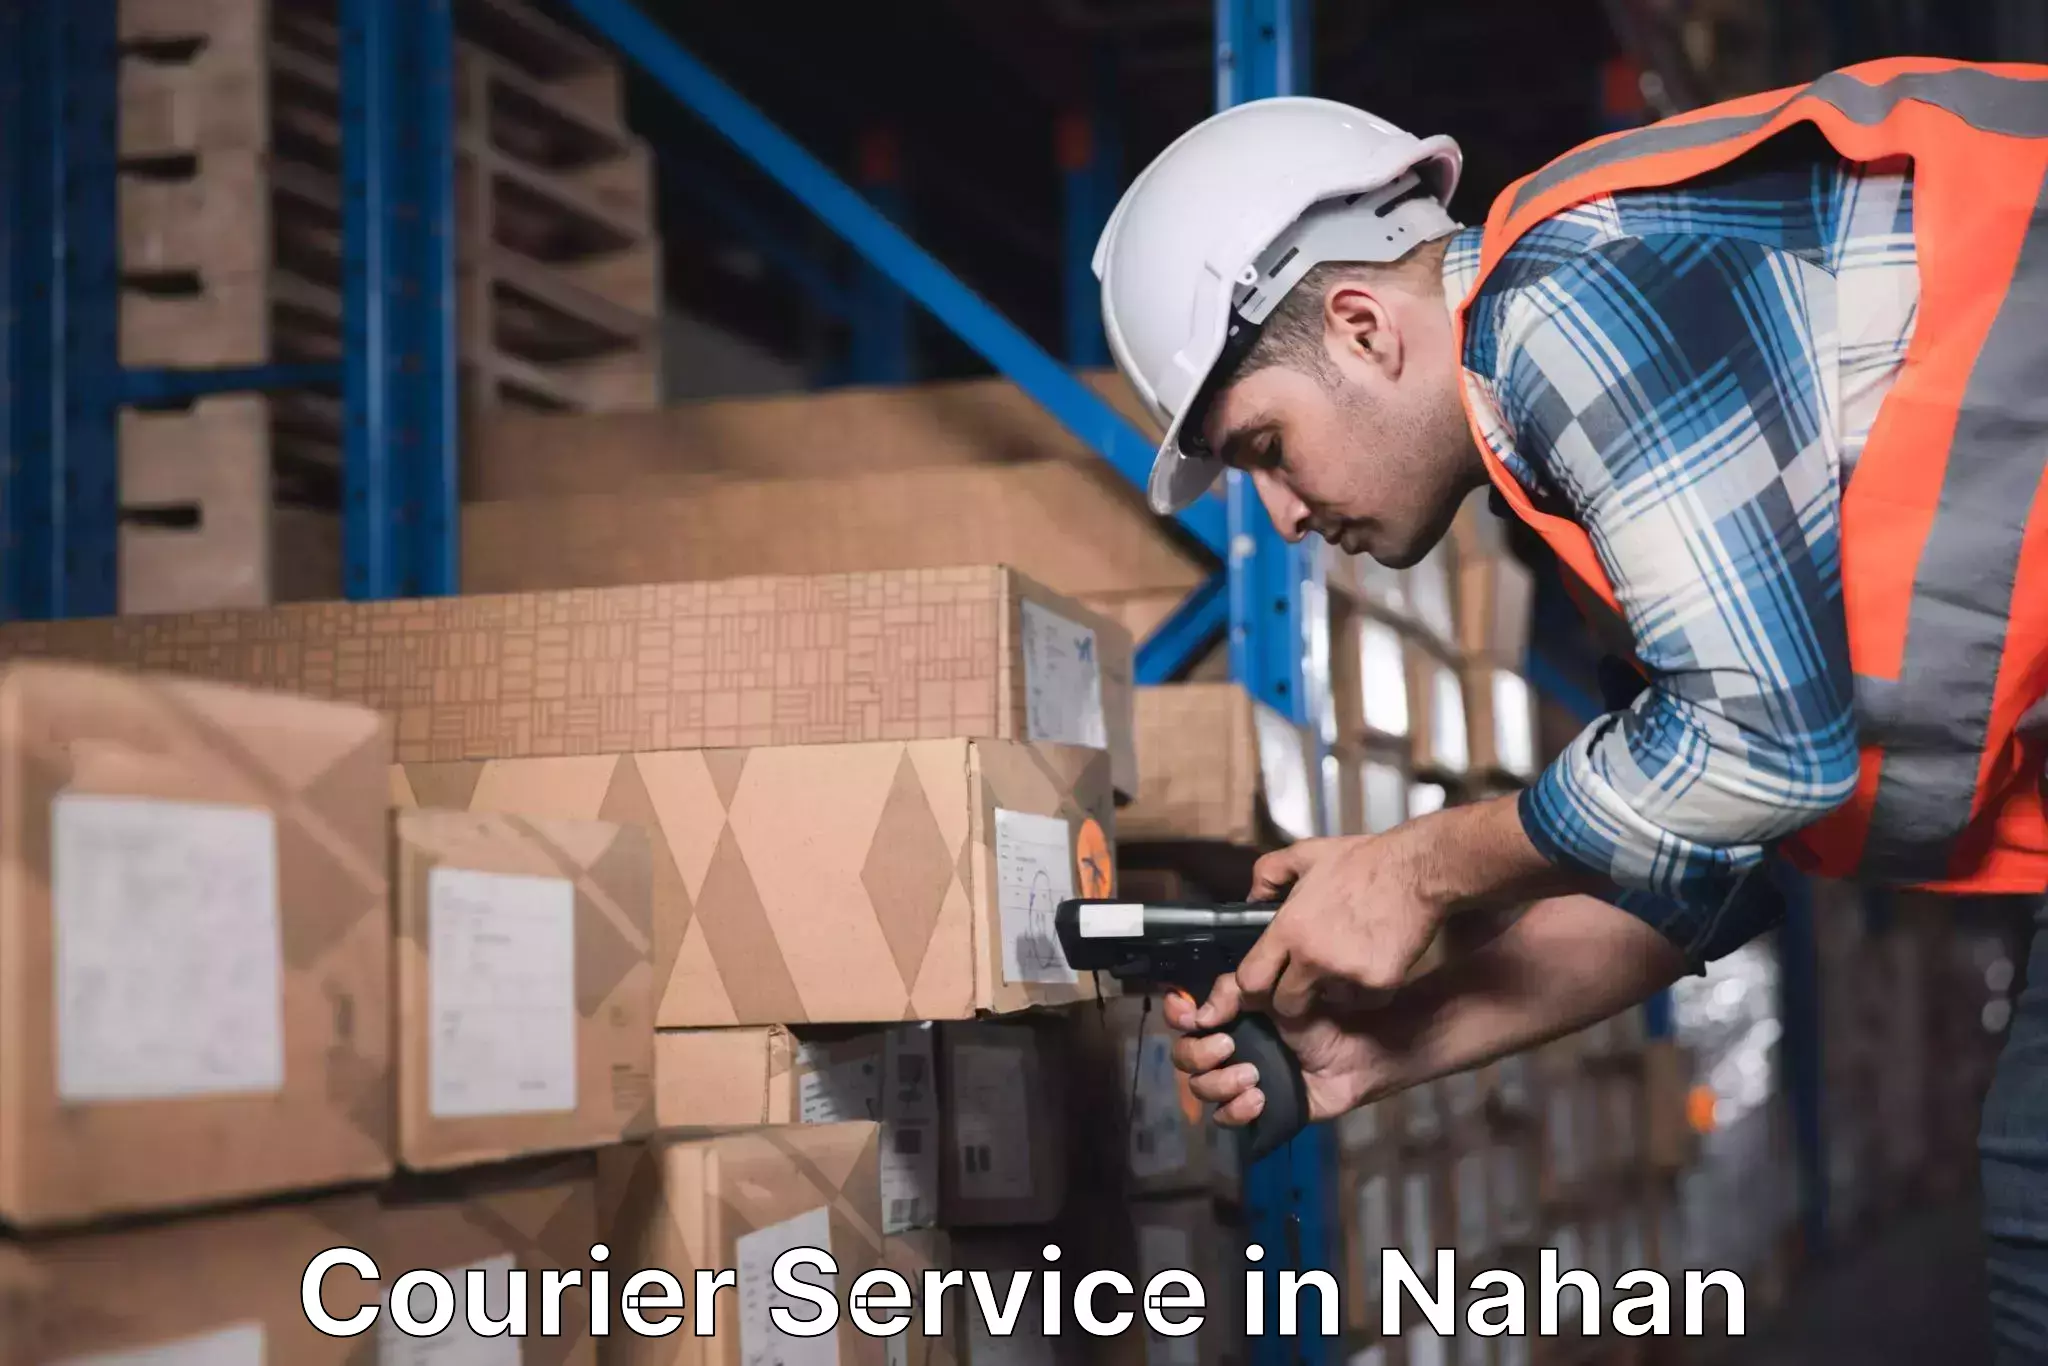 User-friendly delivery service in Nahan